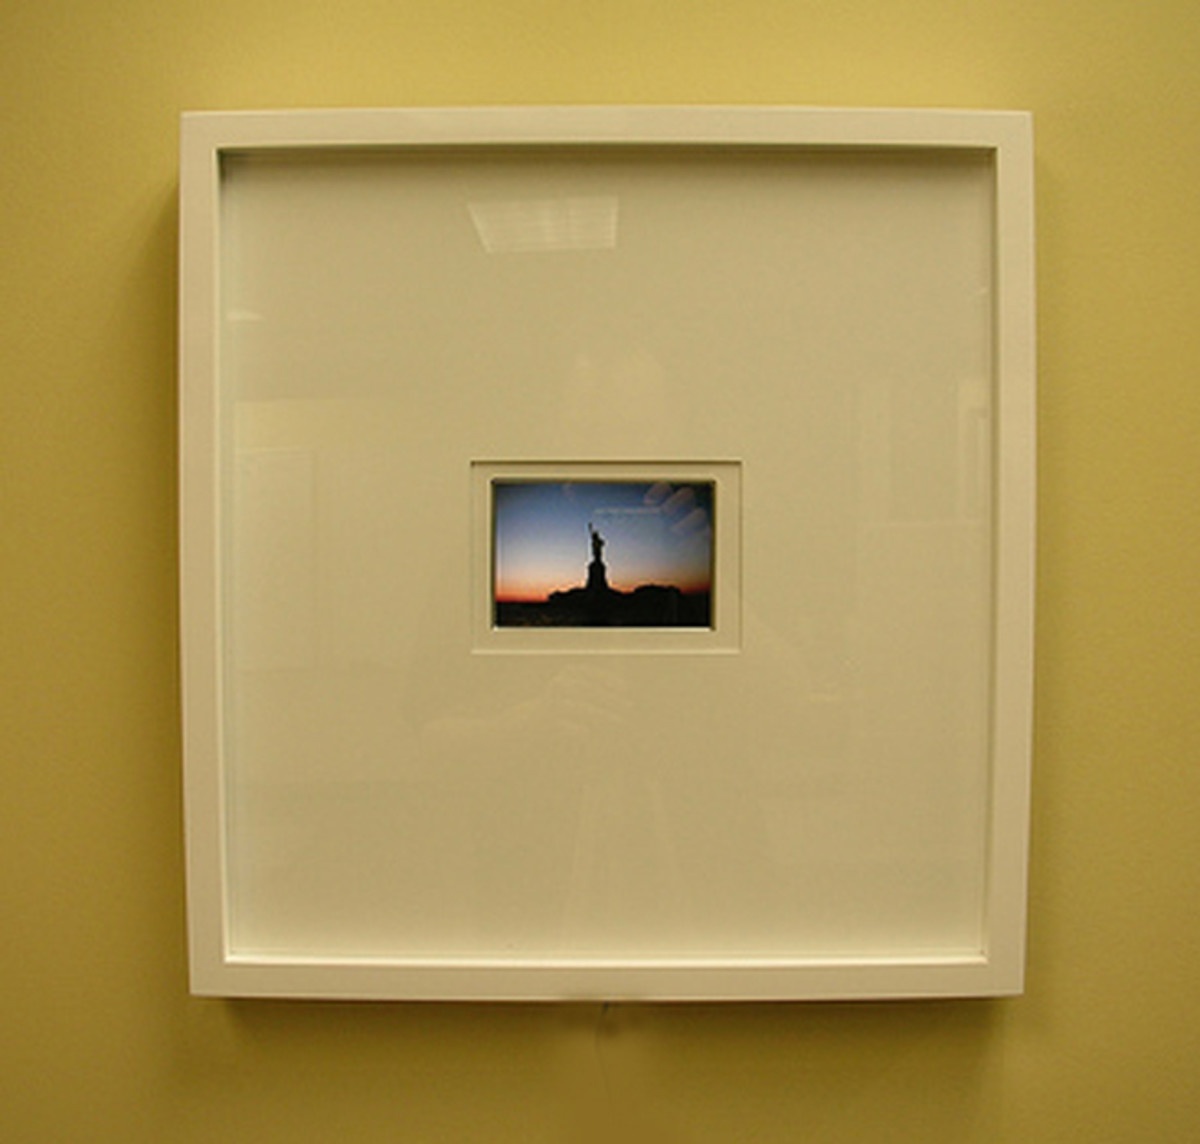 Sometimes a small image in a large frame makes big impact.